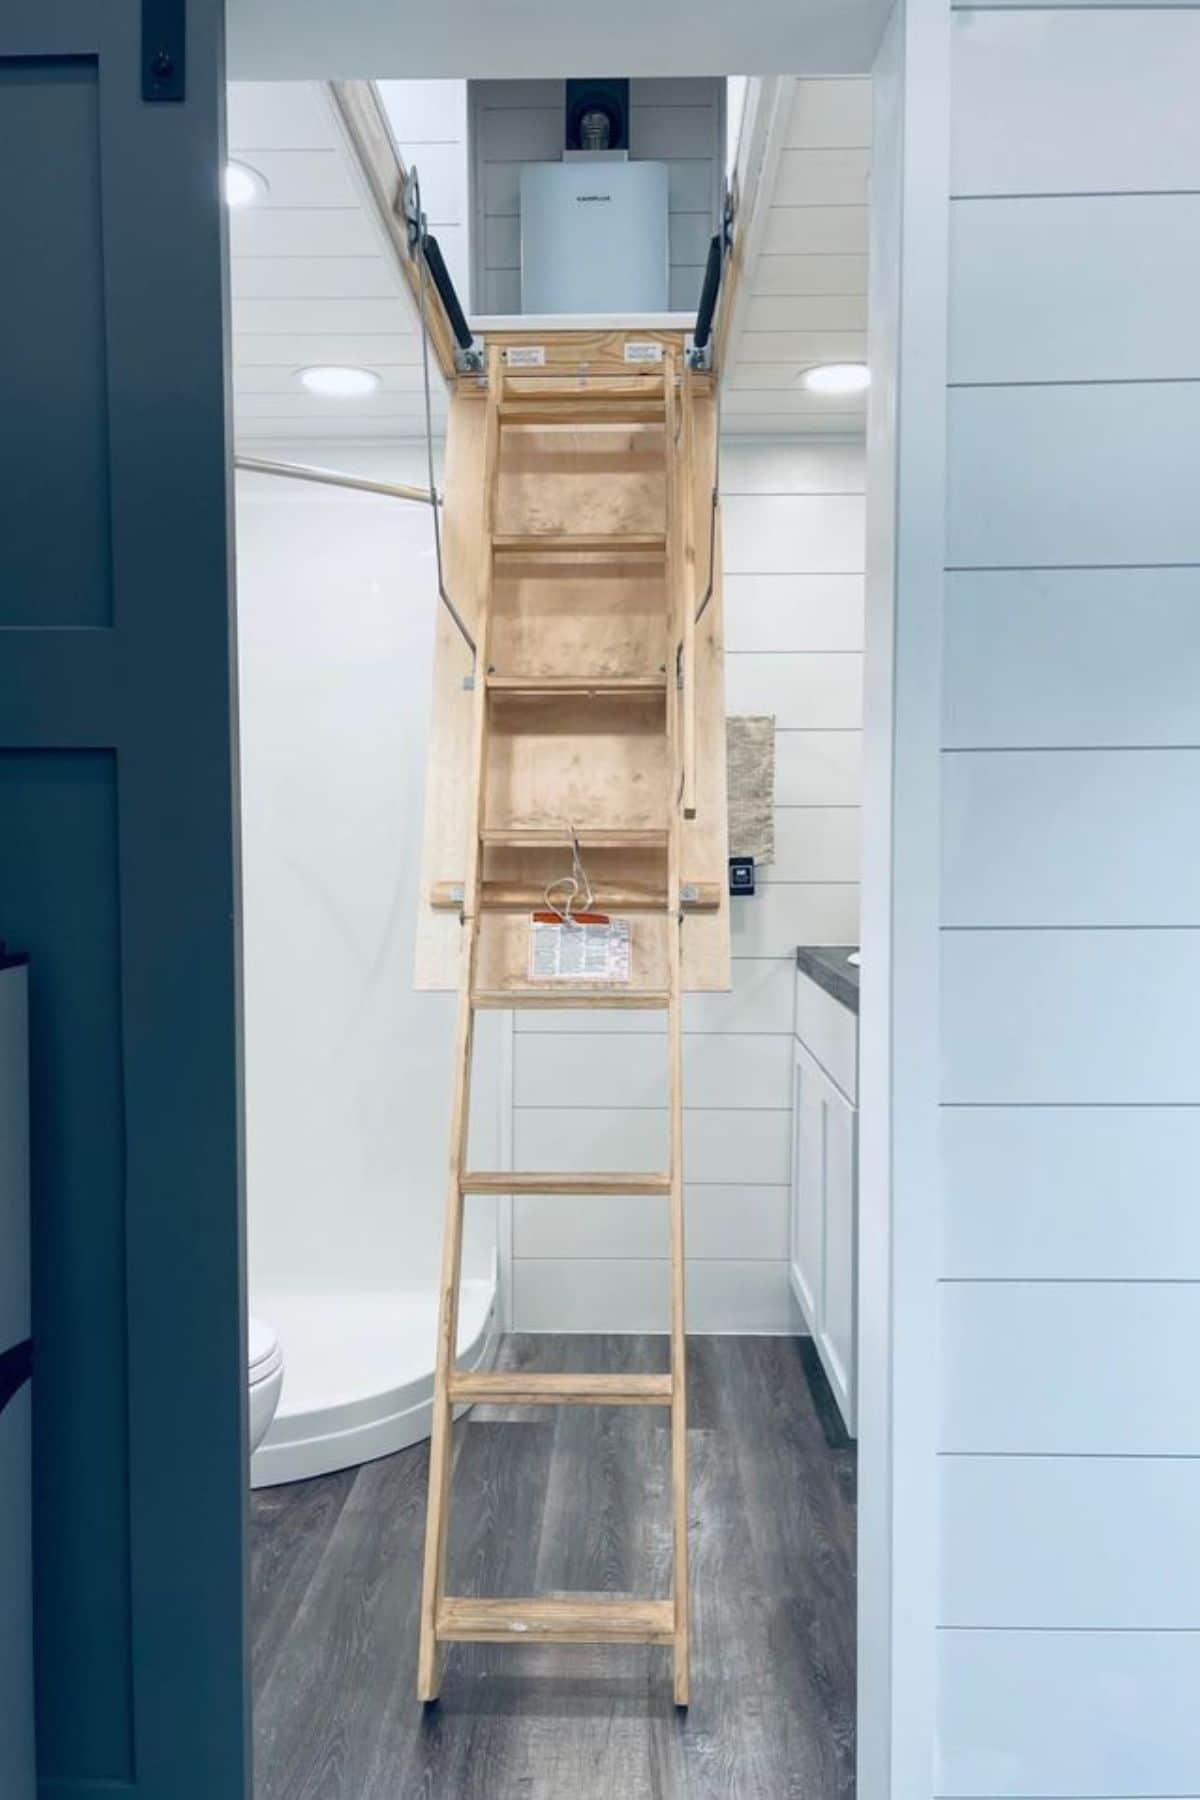 ladder dropped down from ceiling in bathroom